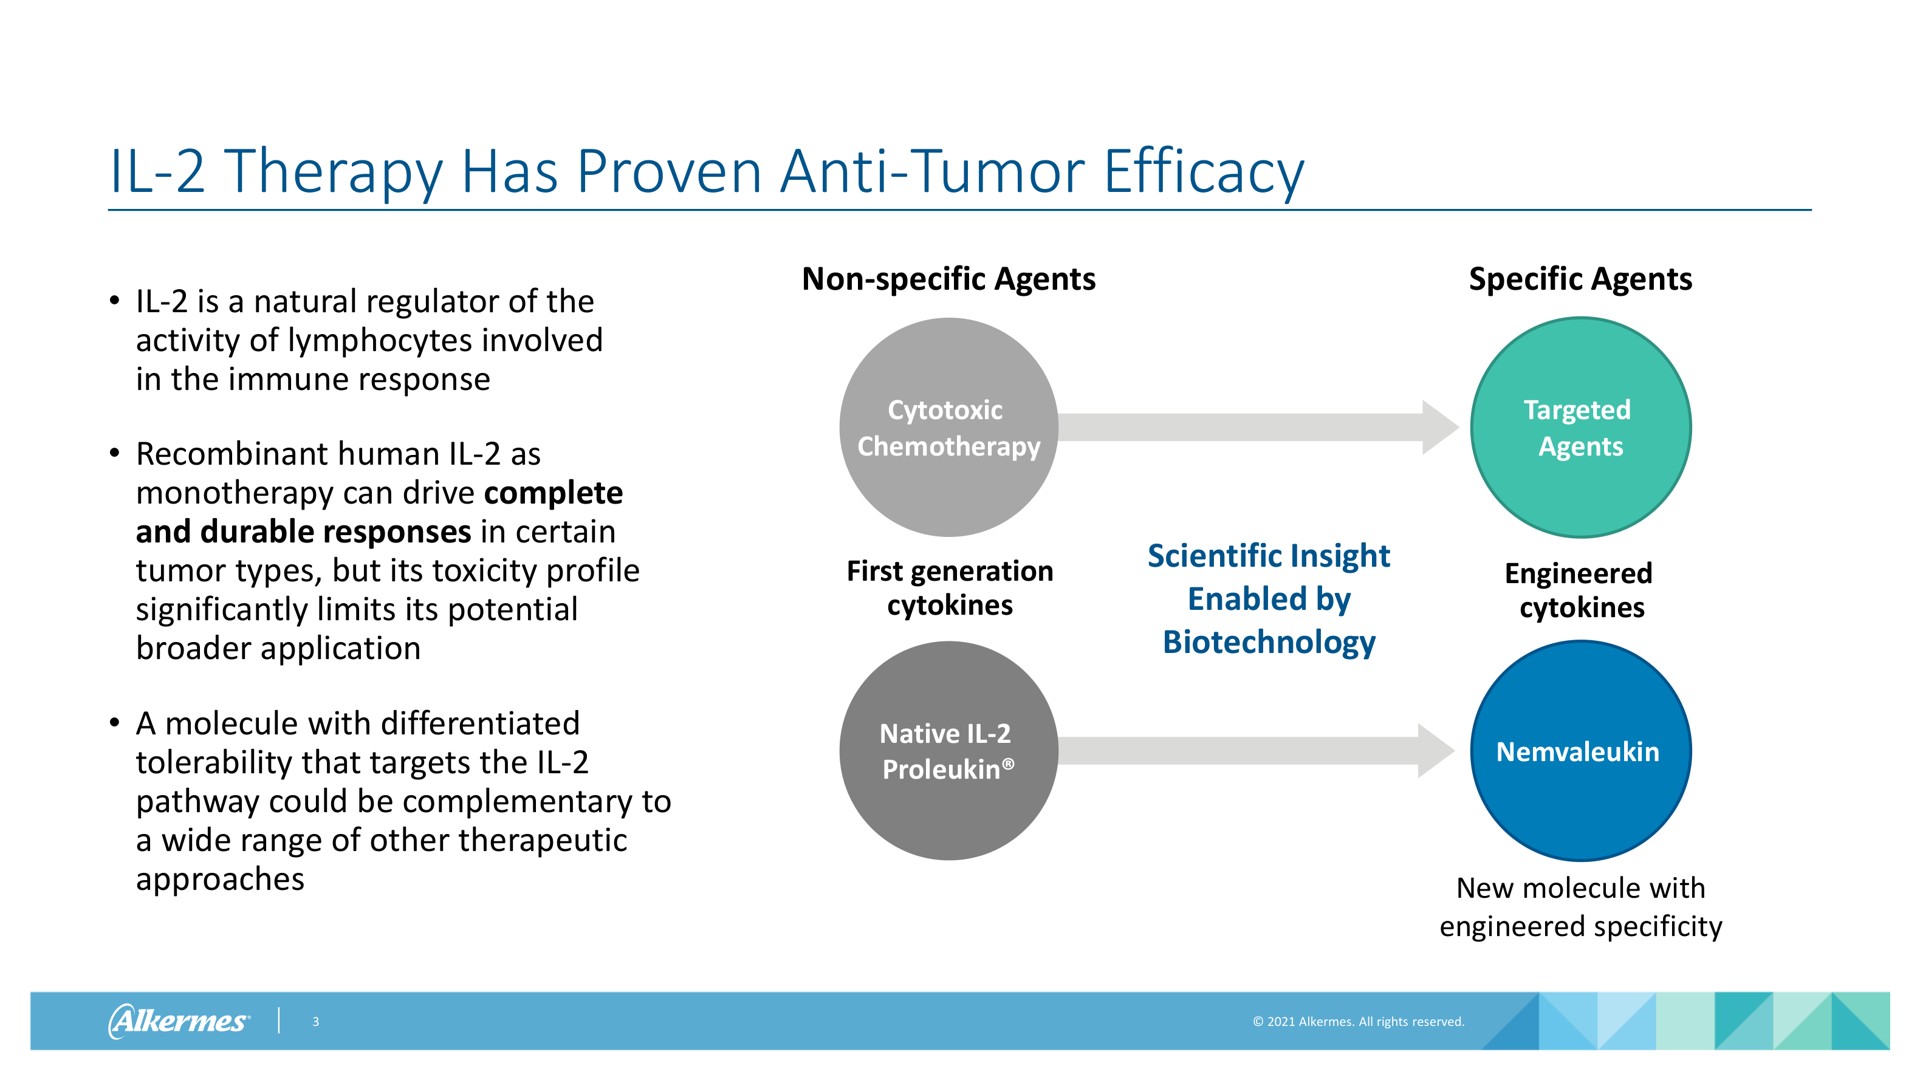 therapy has proven anti tumor efficacy is a natural regulator of the activity of lymphocytes involved in the immune response human as can drive complete and durable responses in certain tumor types but its toxicity profile significantly limits its potential application a molecule with differentiated tolerability that targets the pathway could be complementary to a wide range of other therapeutic approaches non specific agents specific agents cytotoxic chemotherapy first generation native scientific insight enabled by targeted agents engineered new molecule with engineered specificity | Alkermes